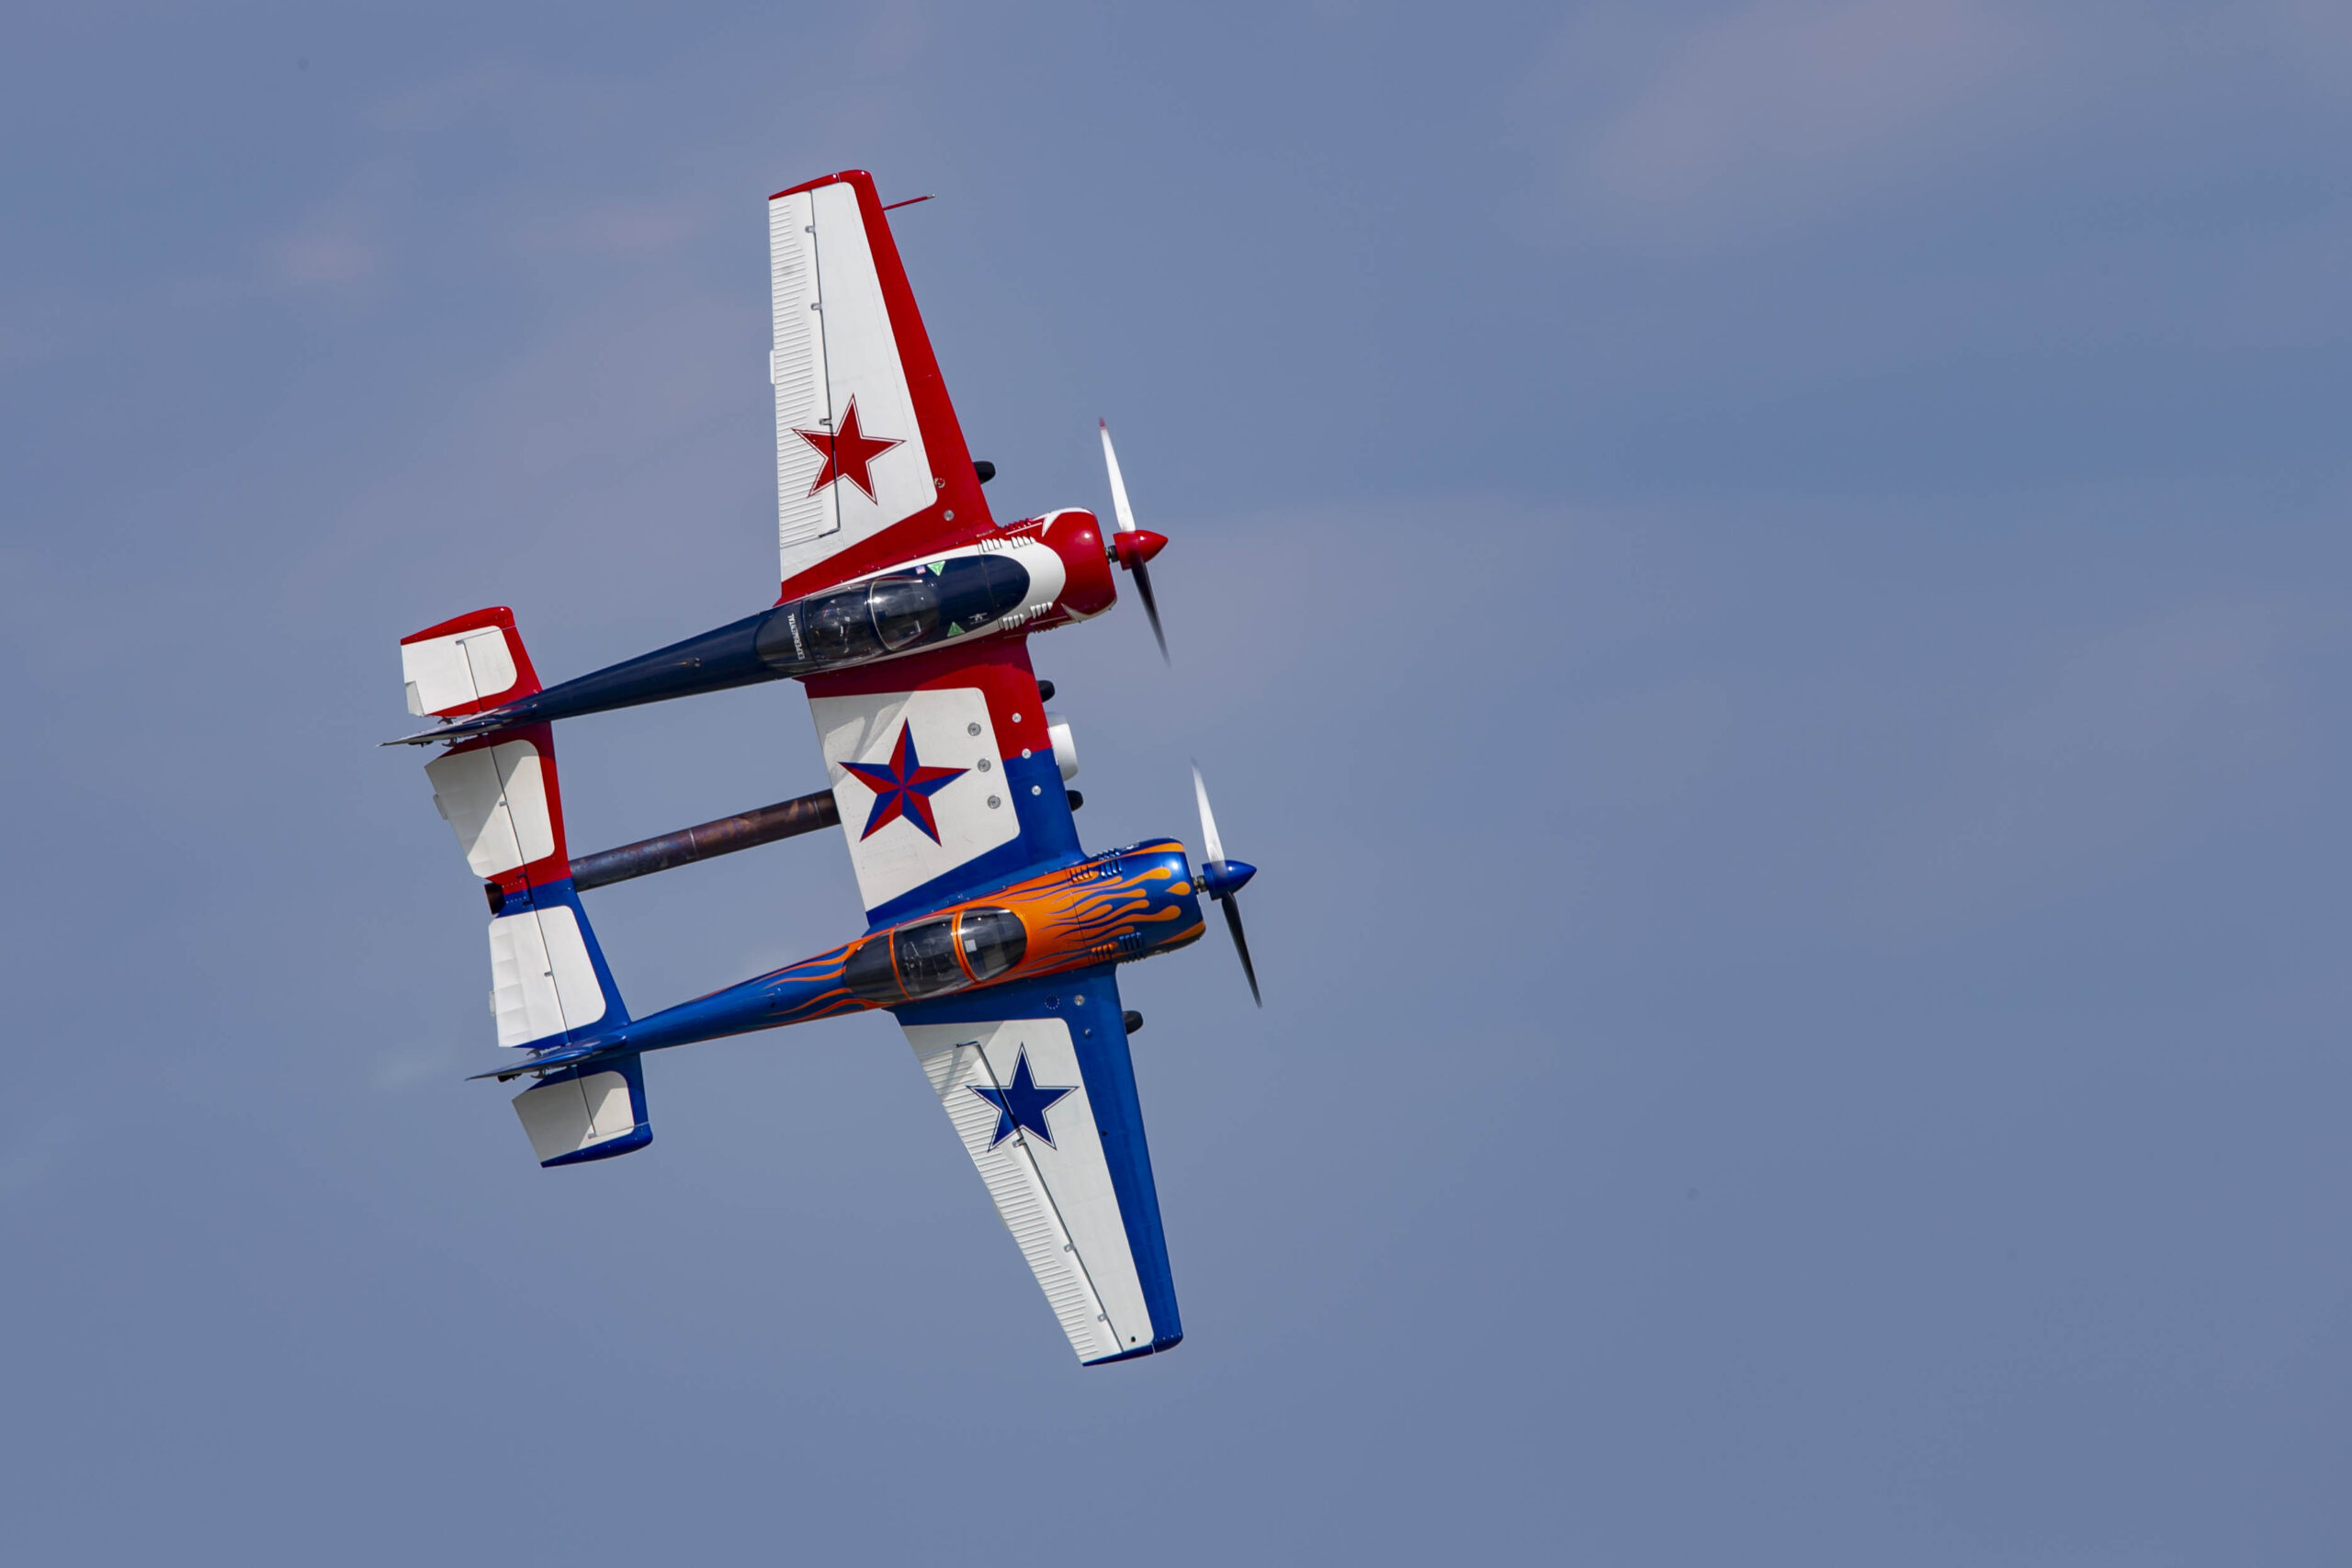 EAA Hopes To Drum Up Interest In Aviation Careers During AirVenture Event